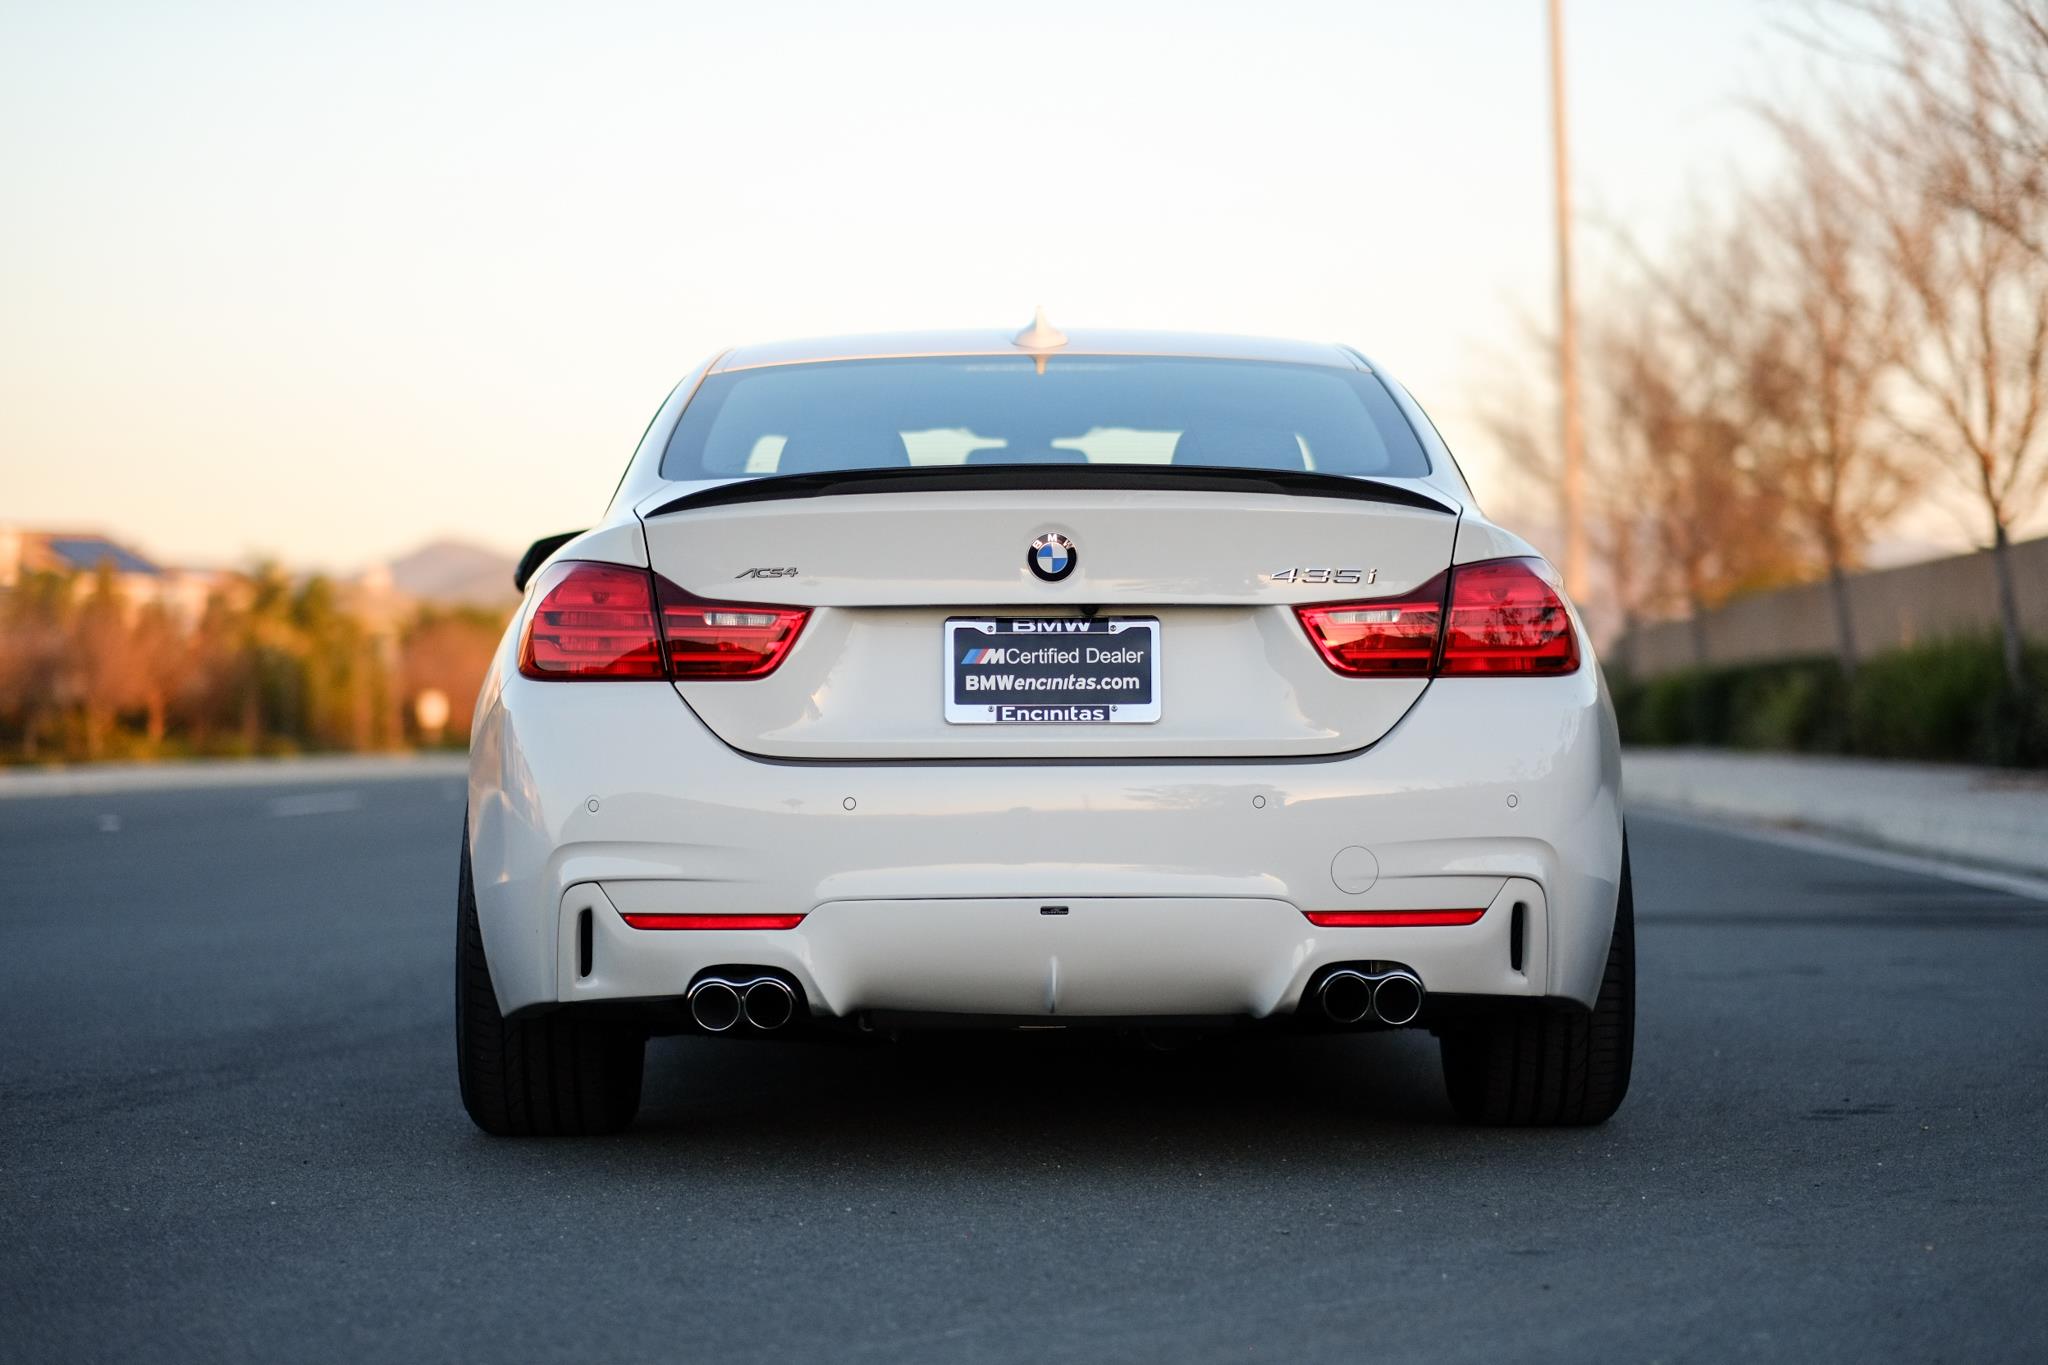 BMW 435i with AC Schnitzer Package -  AC Schnitzer Rear Apron for M Sport Bumper, AC Schnitzer Sport Exhaust with Racing Evo Tips:, AC Schnitzer Rear Skirt Foil:, M Performance Rear Spoiler: